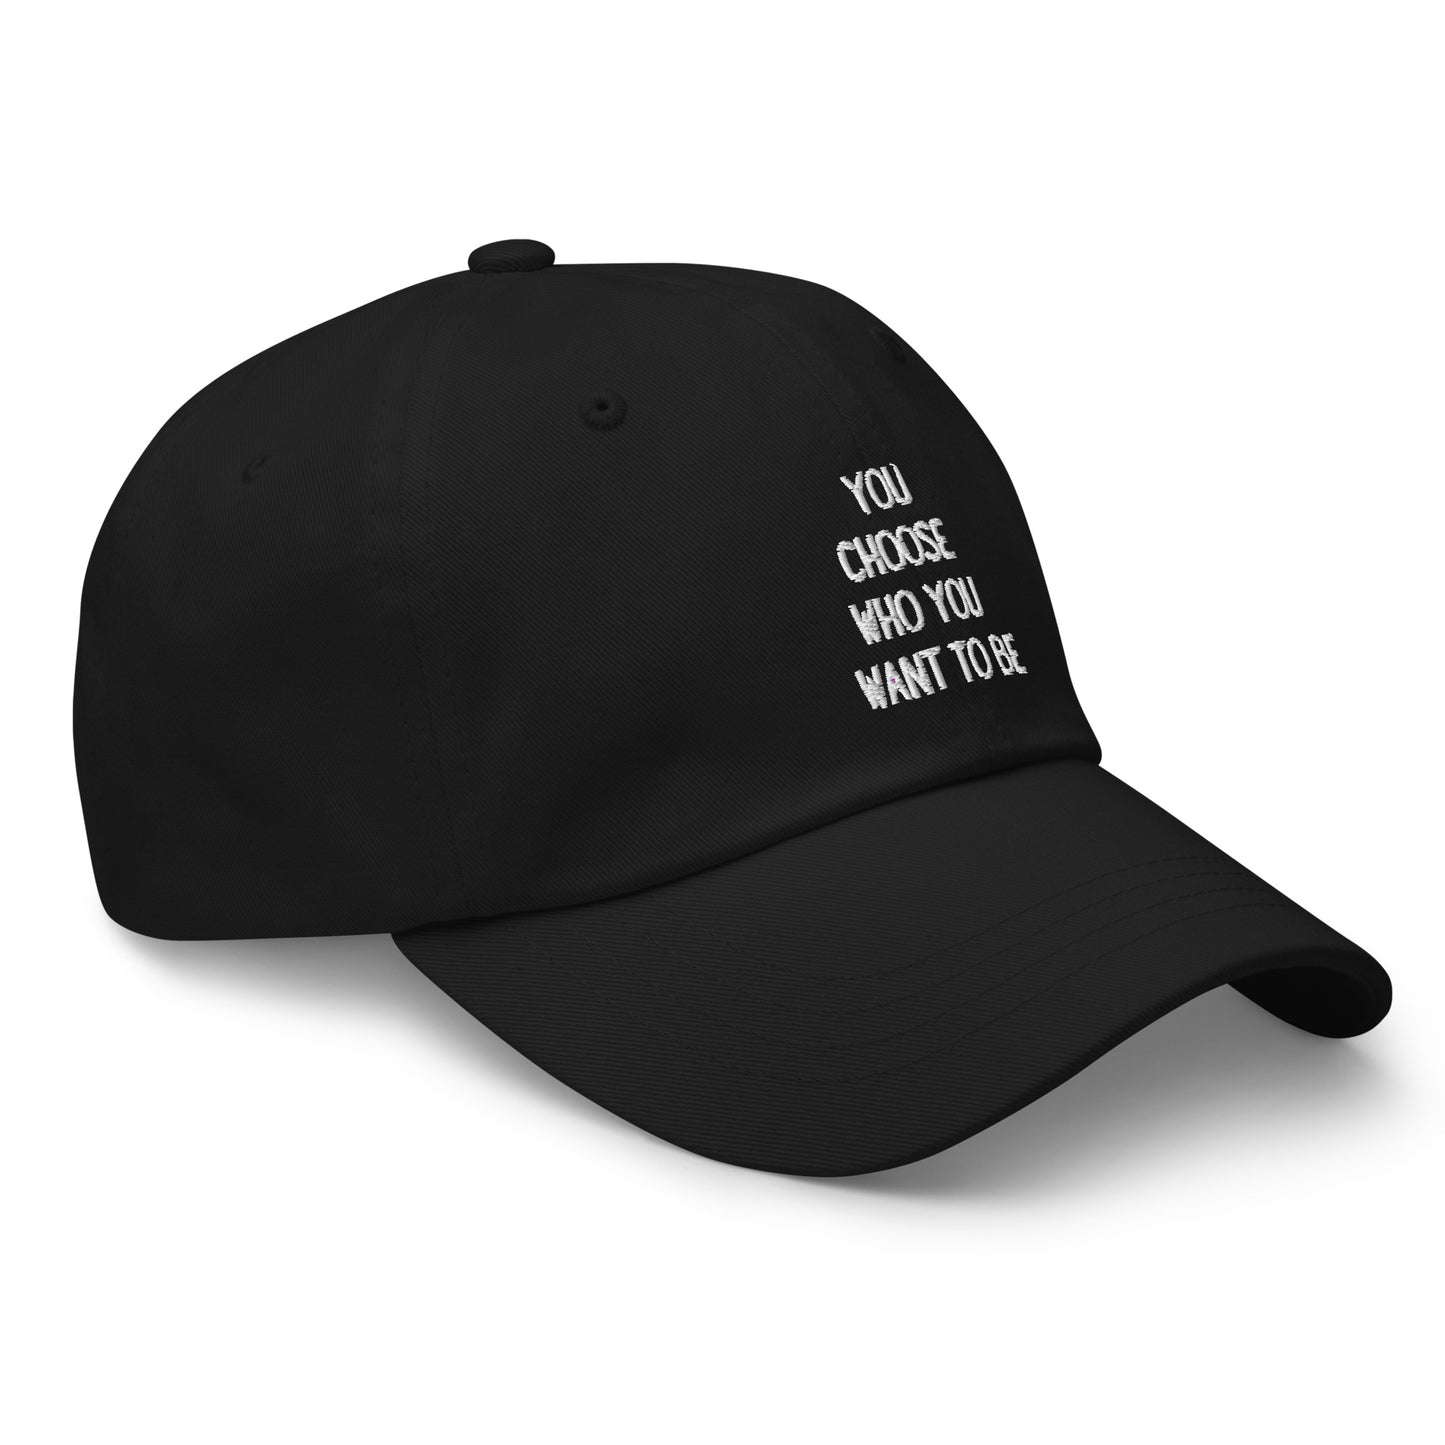 Inspire Empire  || Hat  ||  You choose who you want to be